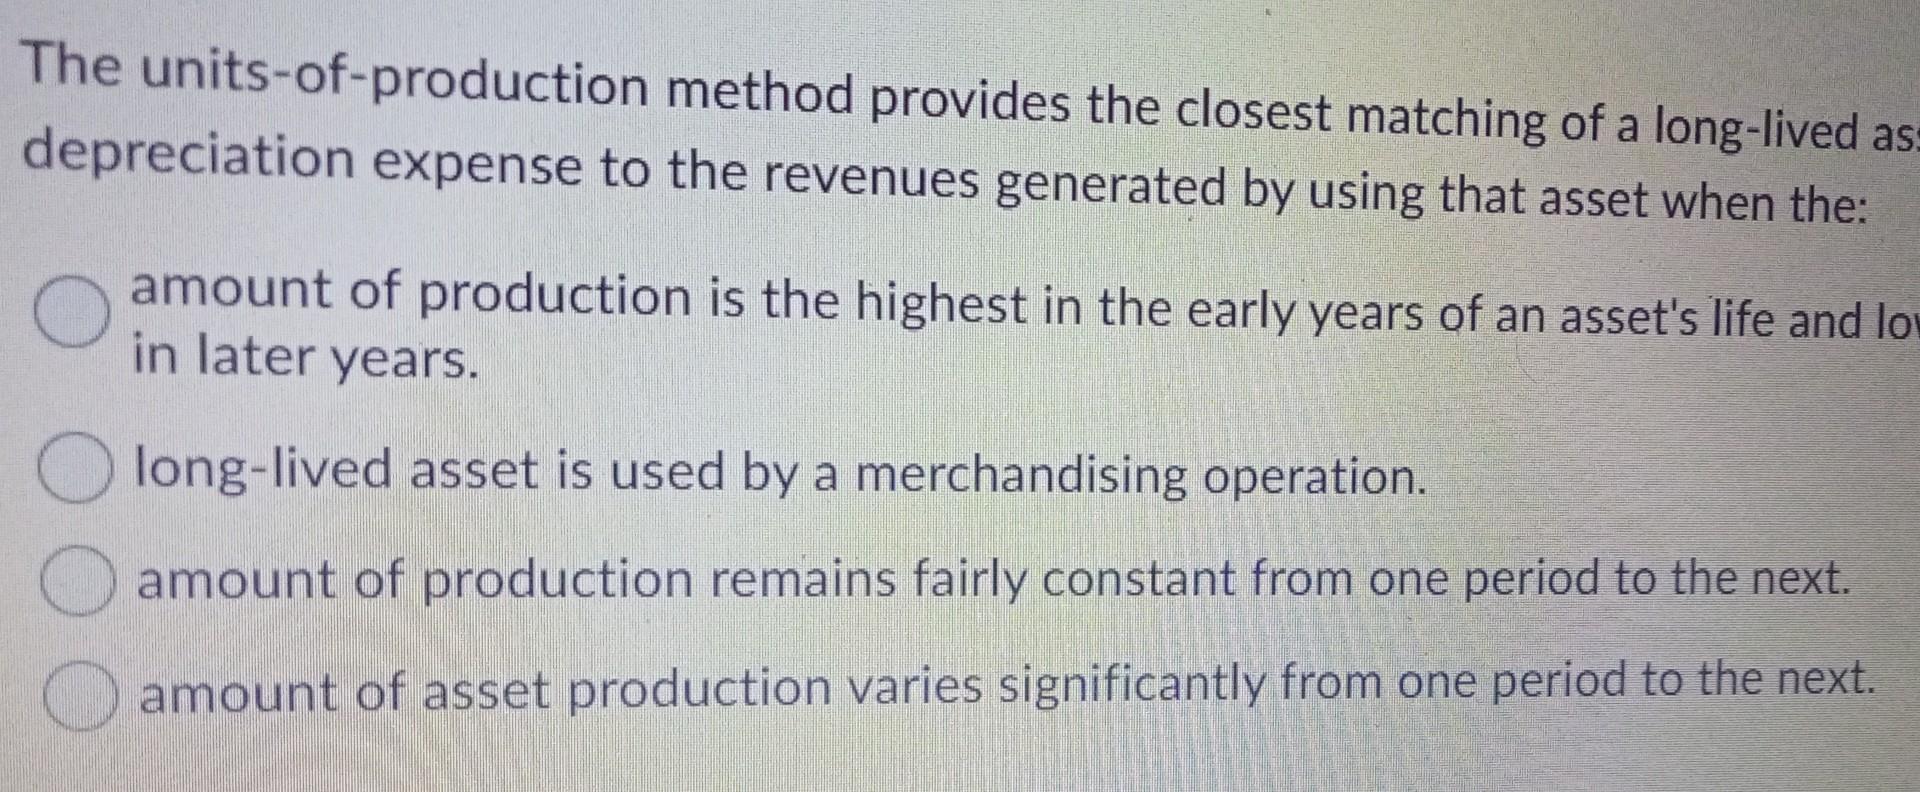 The units-of-production method provides the closest matching of a long-lived as depreciation expense to the revenues generate